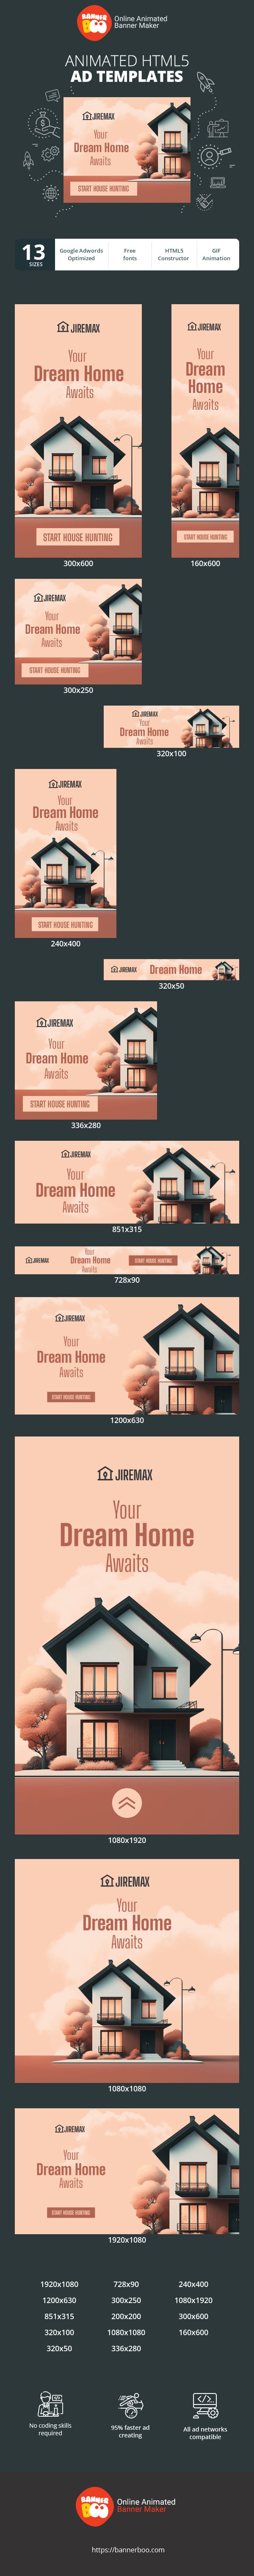 Banner ad template — Your Dream Home Awaits — Real Estate